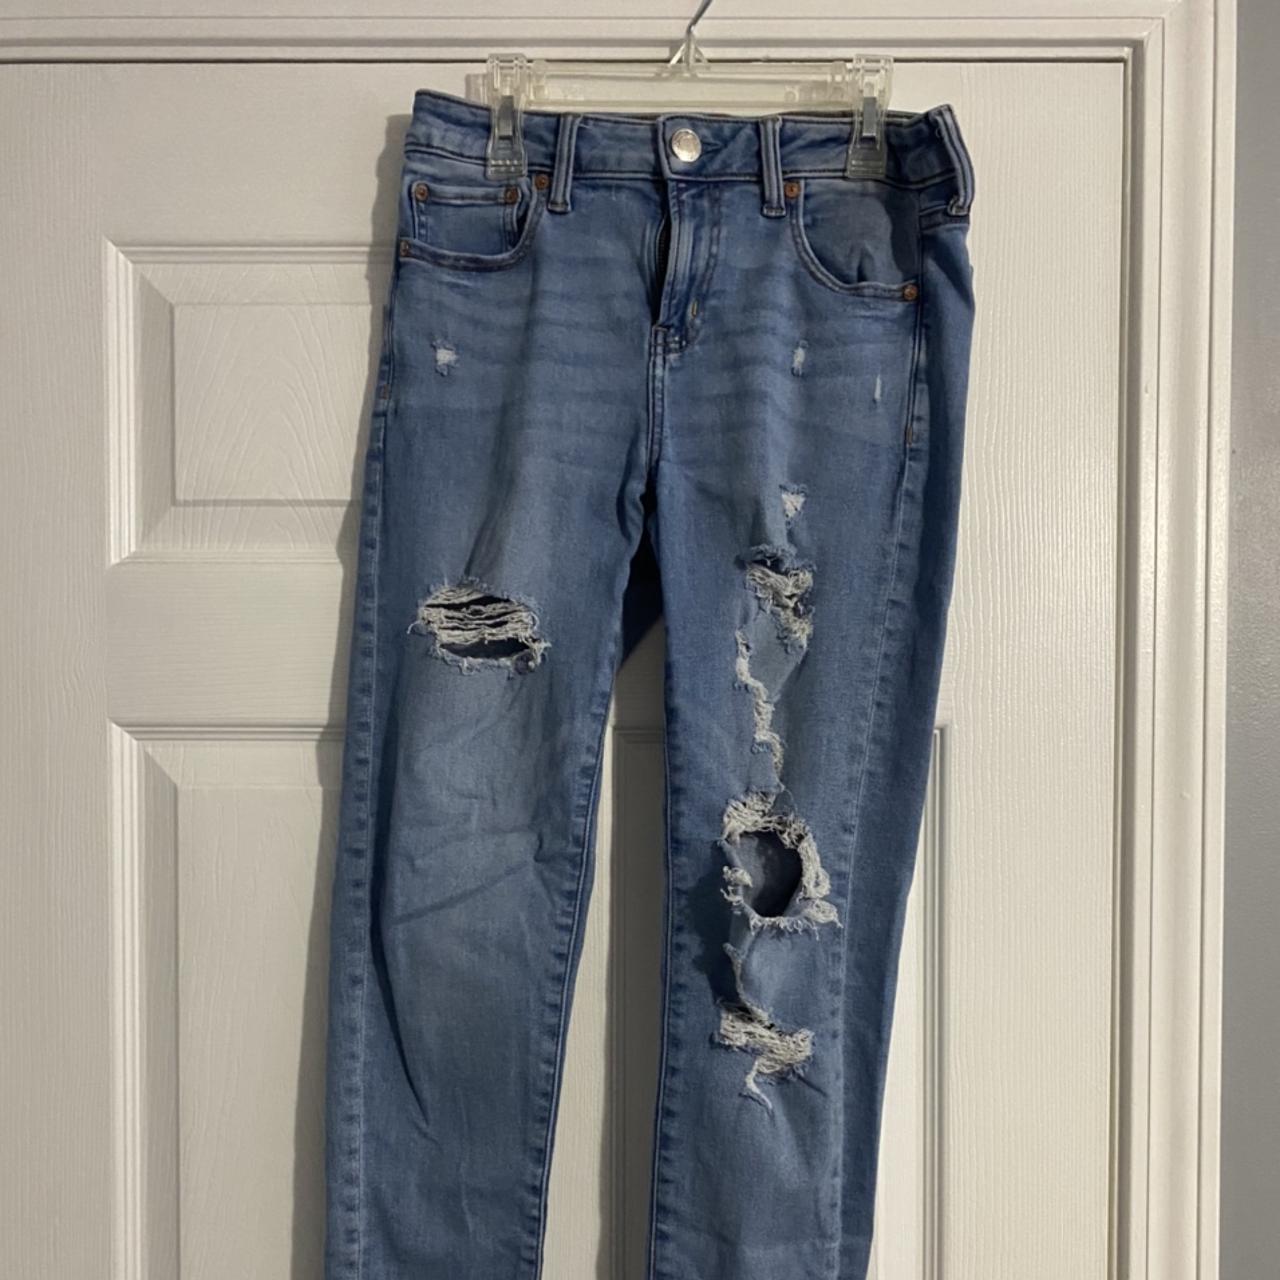 AMERICAN EAGLE NEXT LEVEL STRETCH JEANS! such a... - Depop